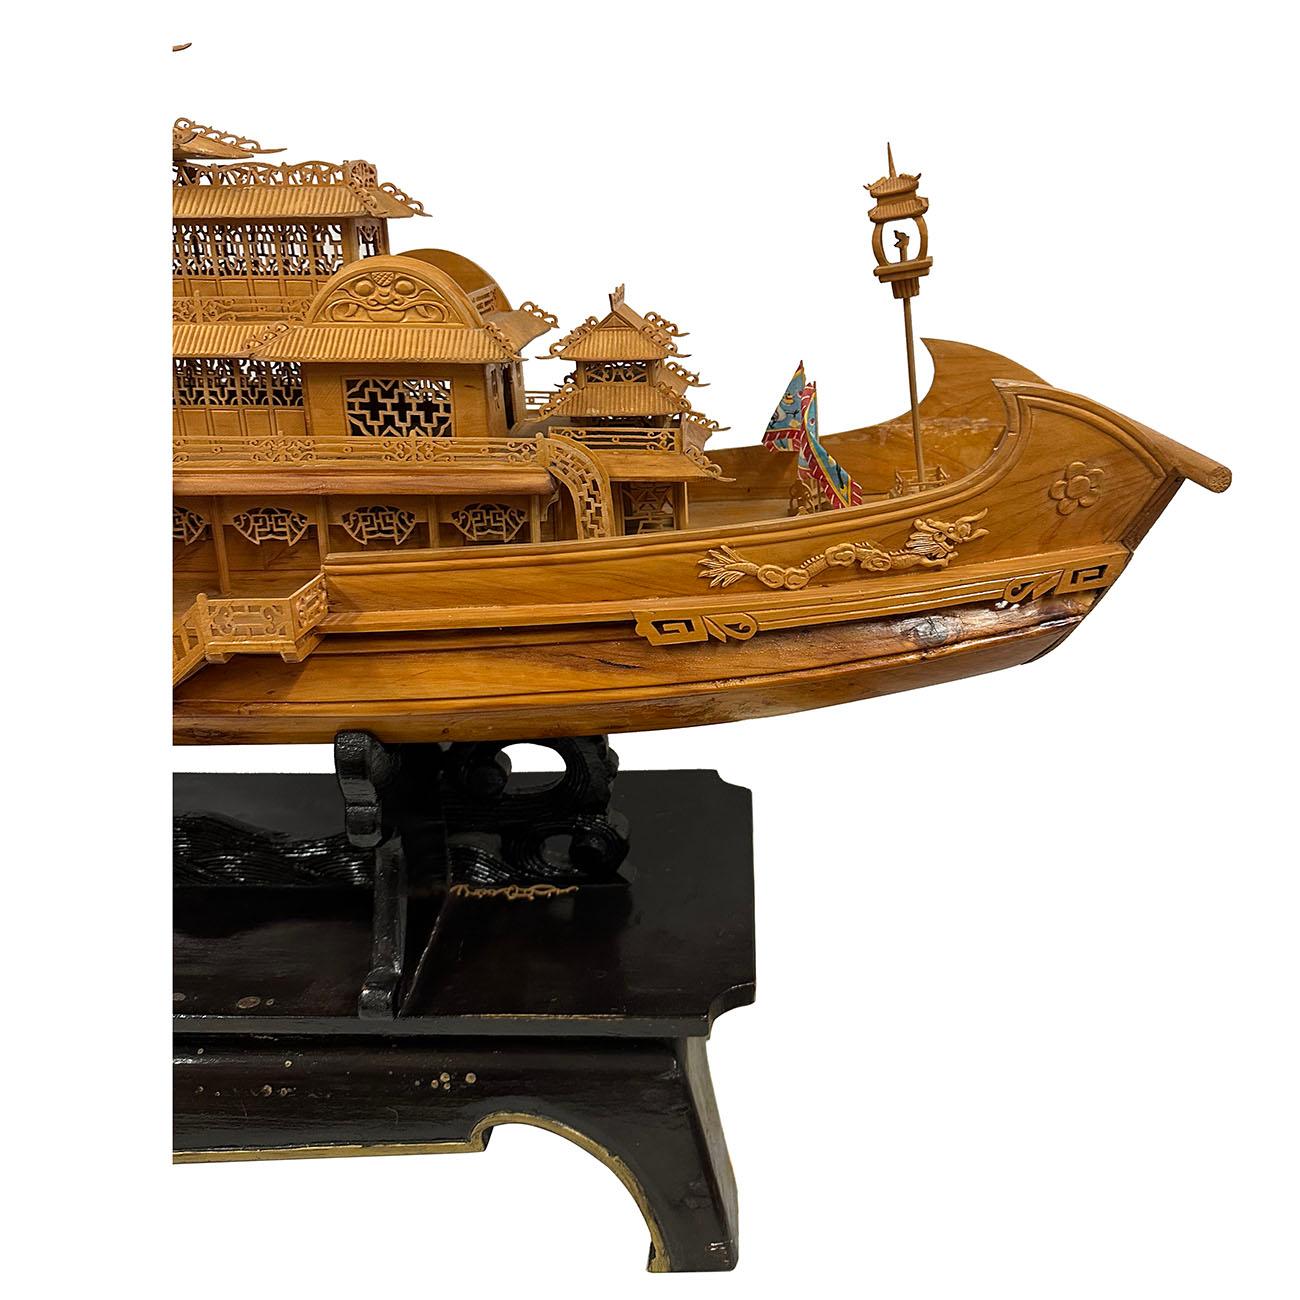 This large model of imperial dragon ship was intricately and elaborately carved with brilliant lattice work and details on the display stand. It actual a royal palace built on the ship. The entire ship were extremely fine carved to scale according